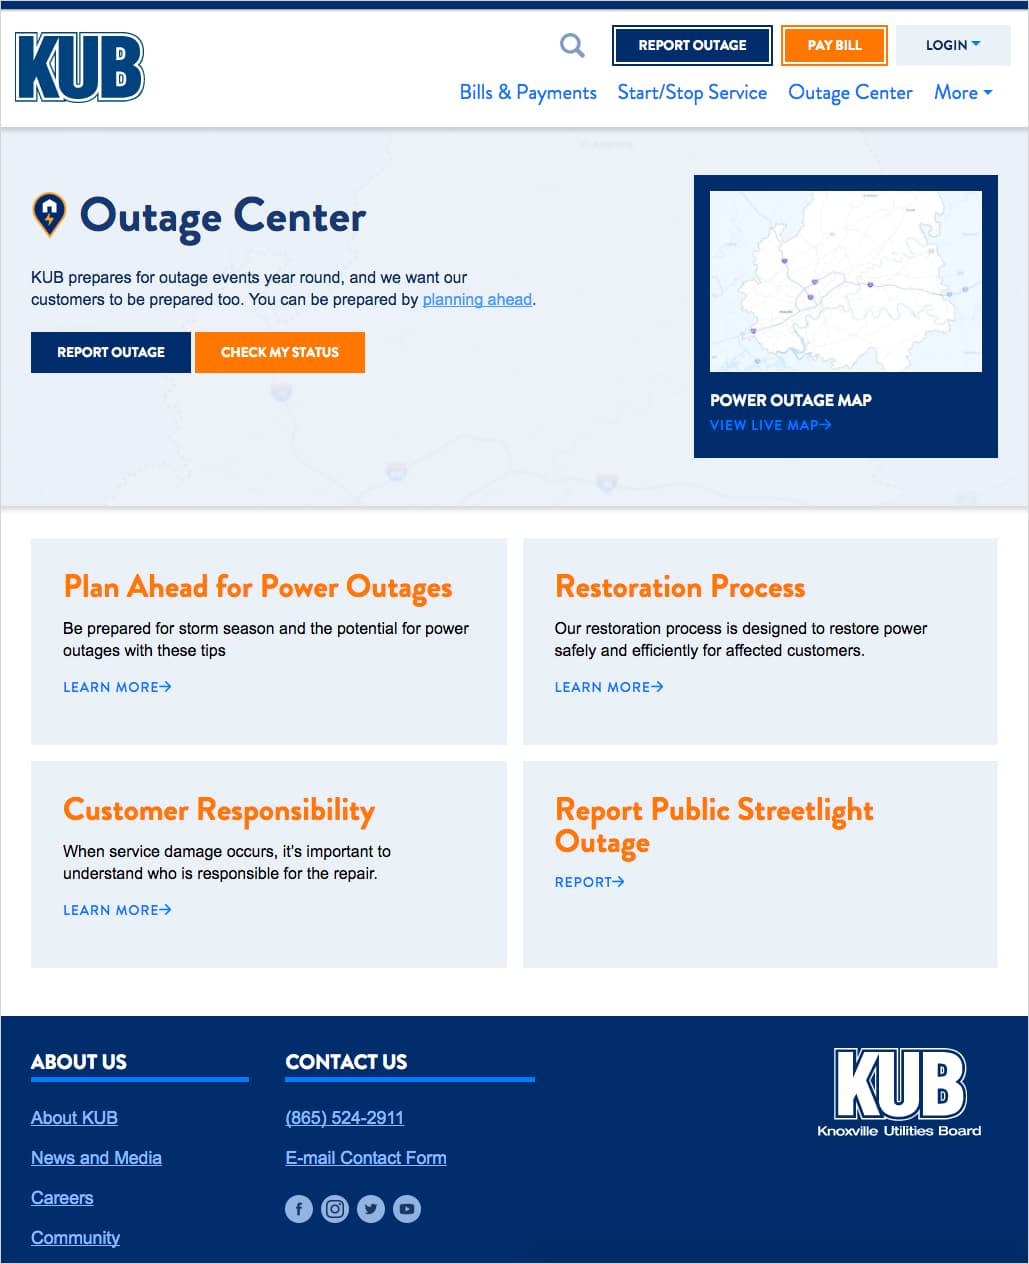 The Outage Center page